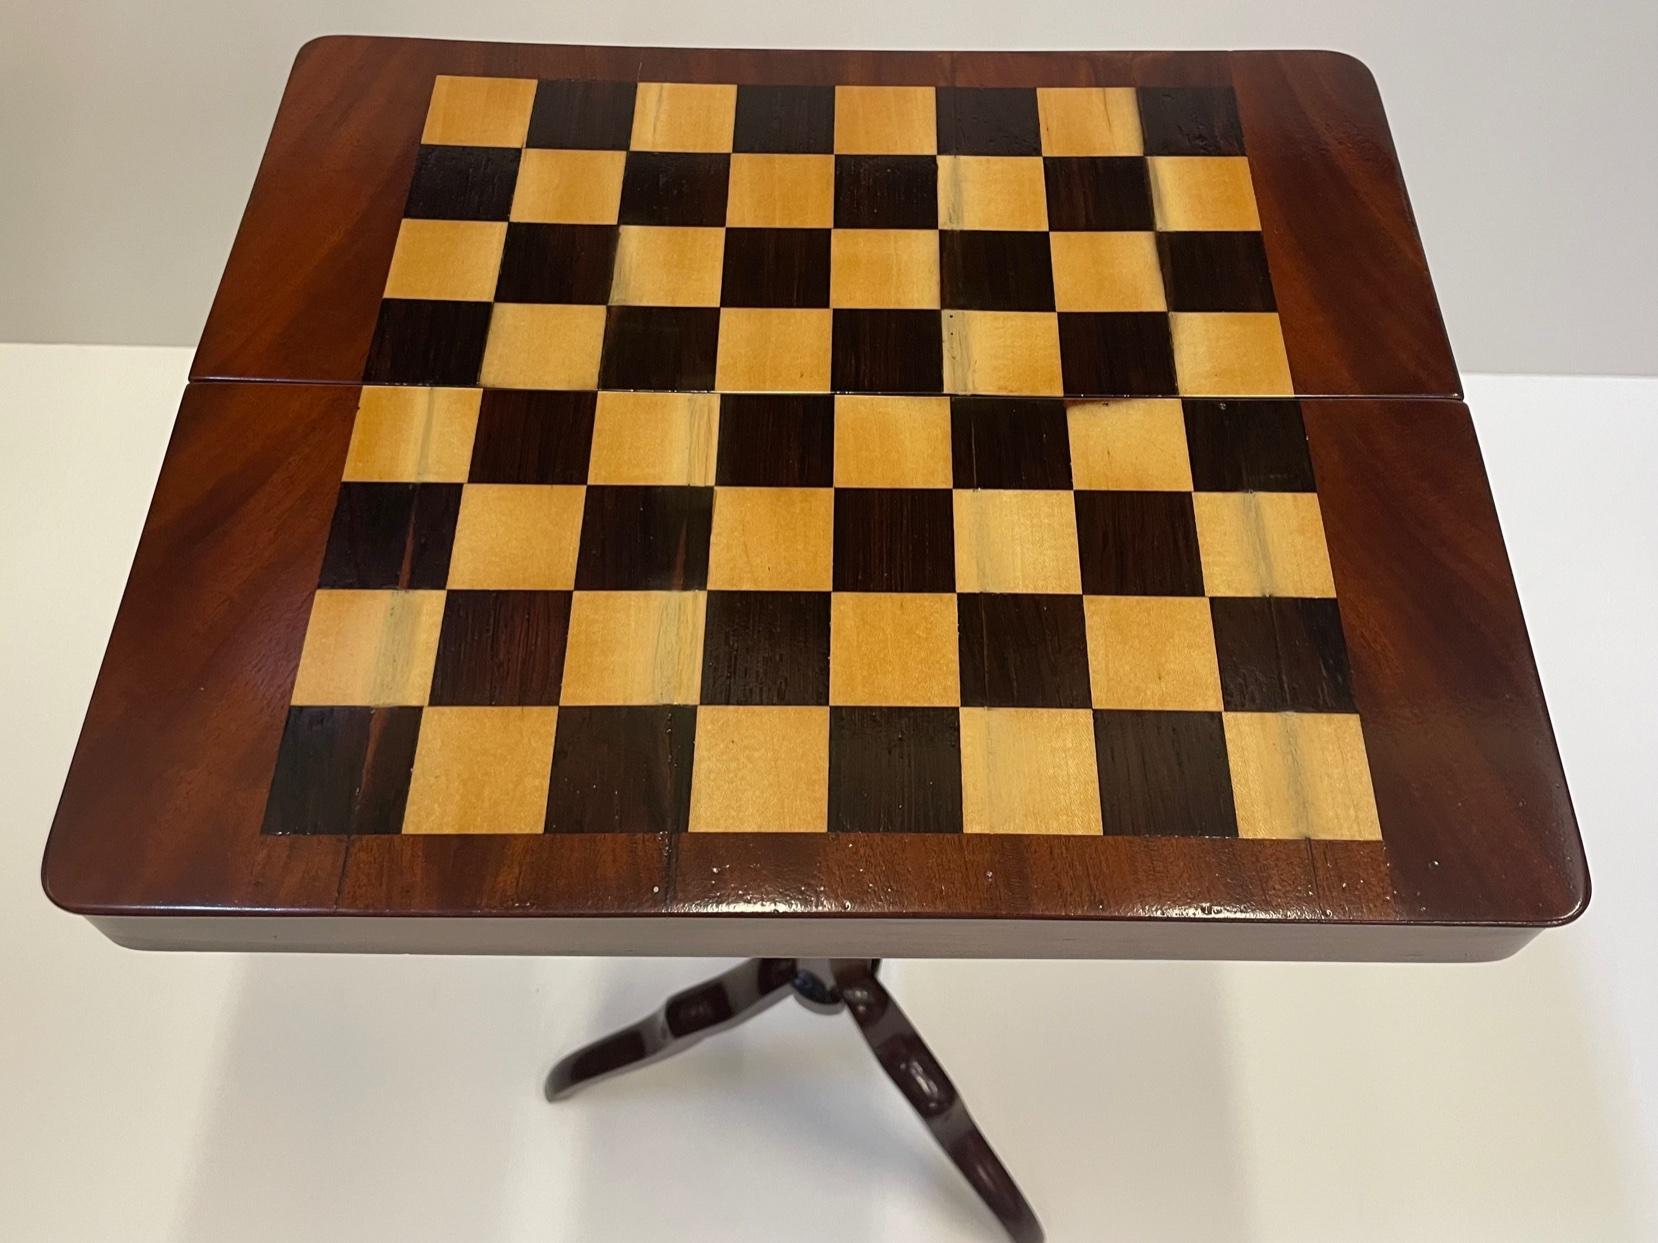 A beautiful 19th century campaign traveling chess table with gorgeous inlaid top and adjustable tripod base. The table collapses and fits in a box closed 15 W x 6.5 D x 3 H
Box open 15 W 13 D 1.5 H
stand is 21 H adjusts to 28.5
tripod base 13.5 x